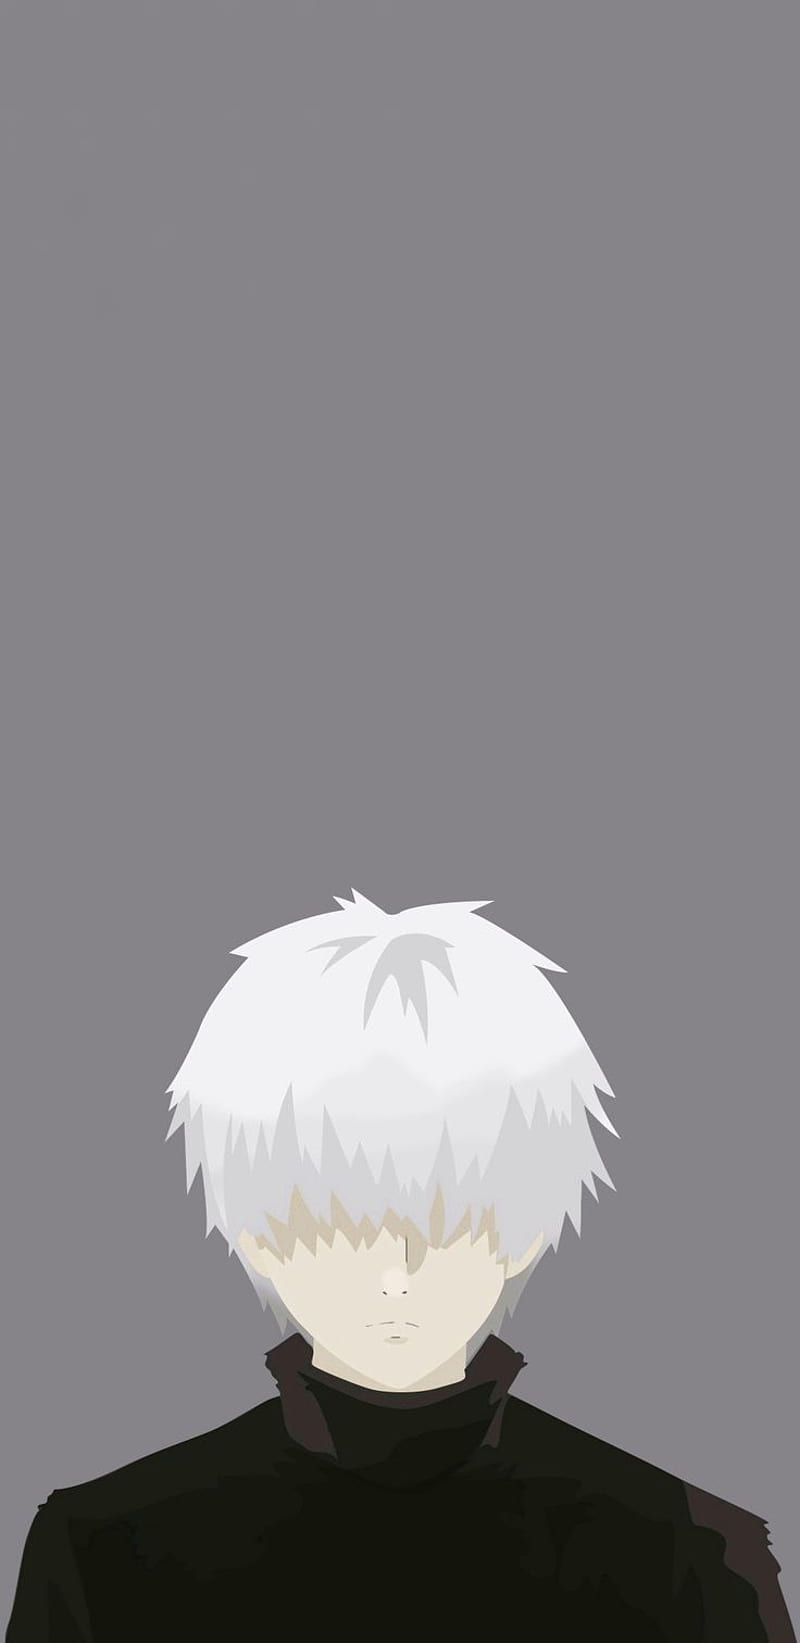 20+ Minimalist Anime Wallpapers for iPhone and Android by Arthur Thomas